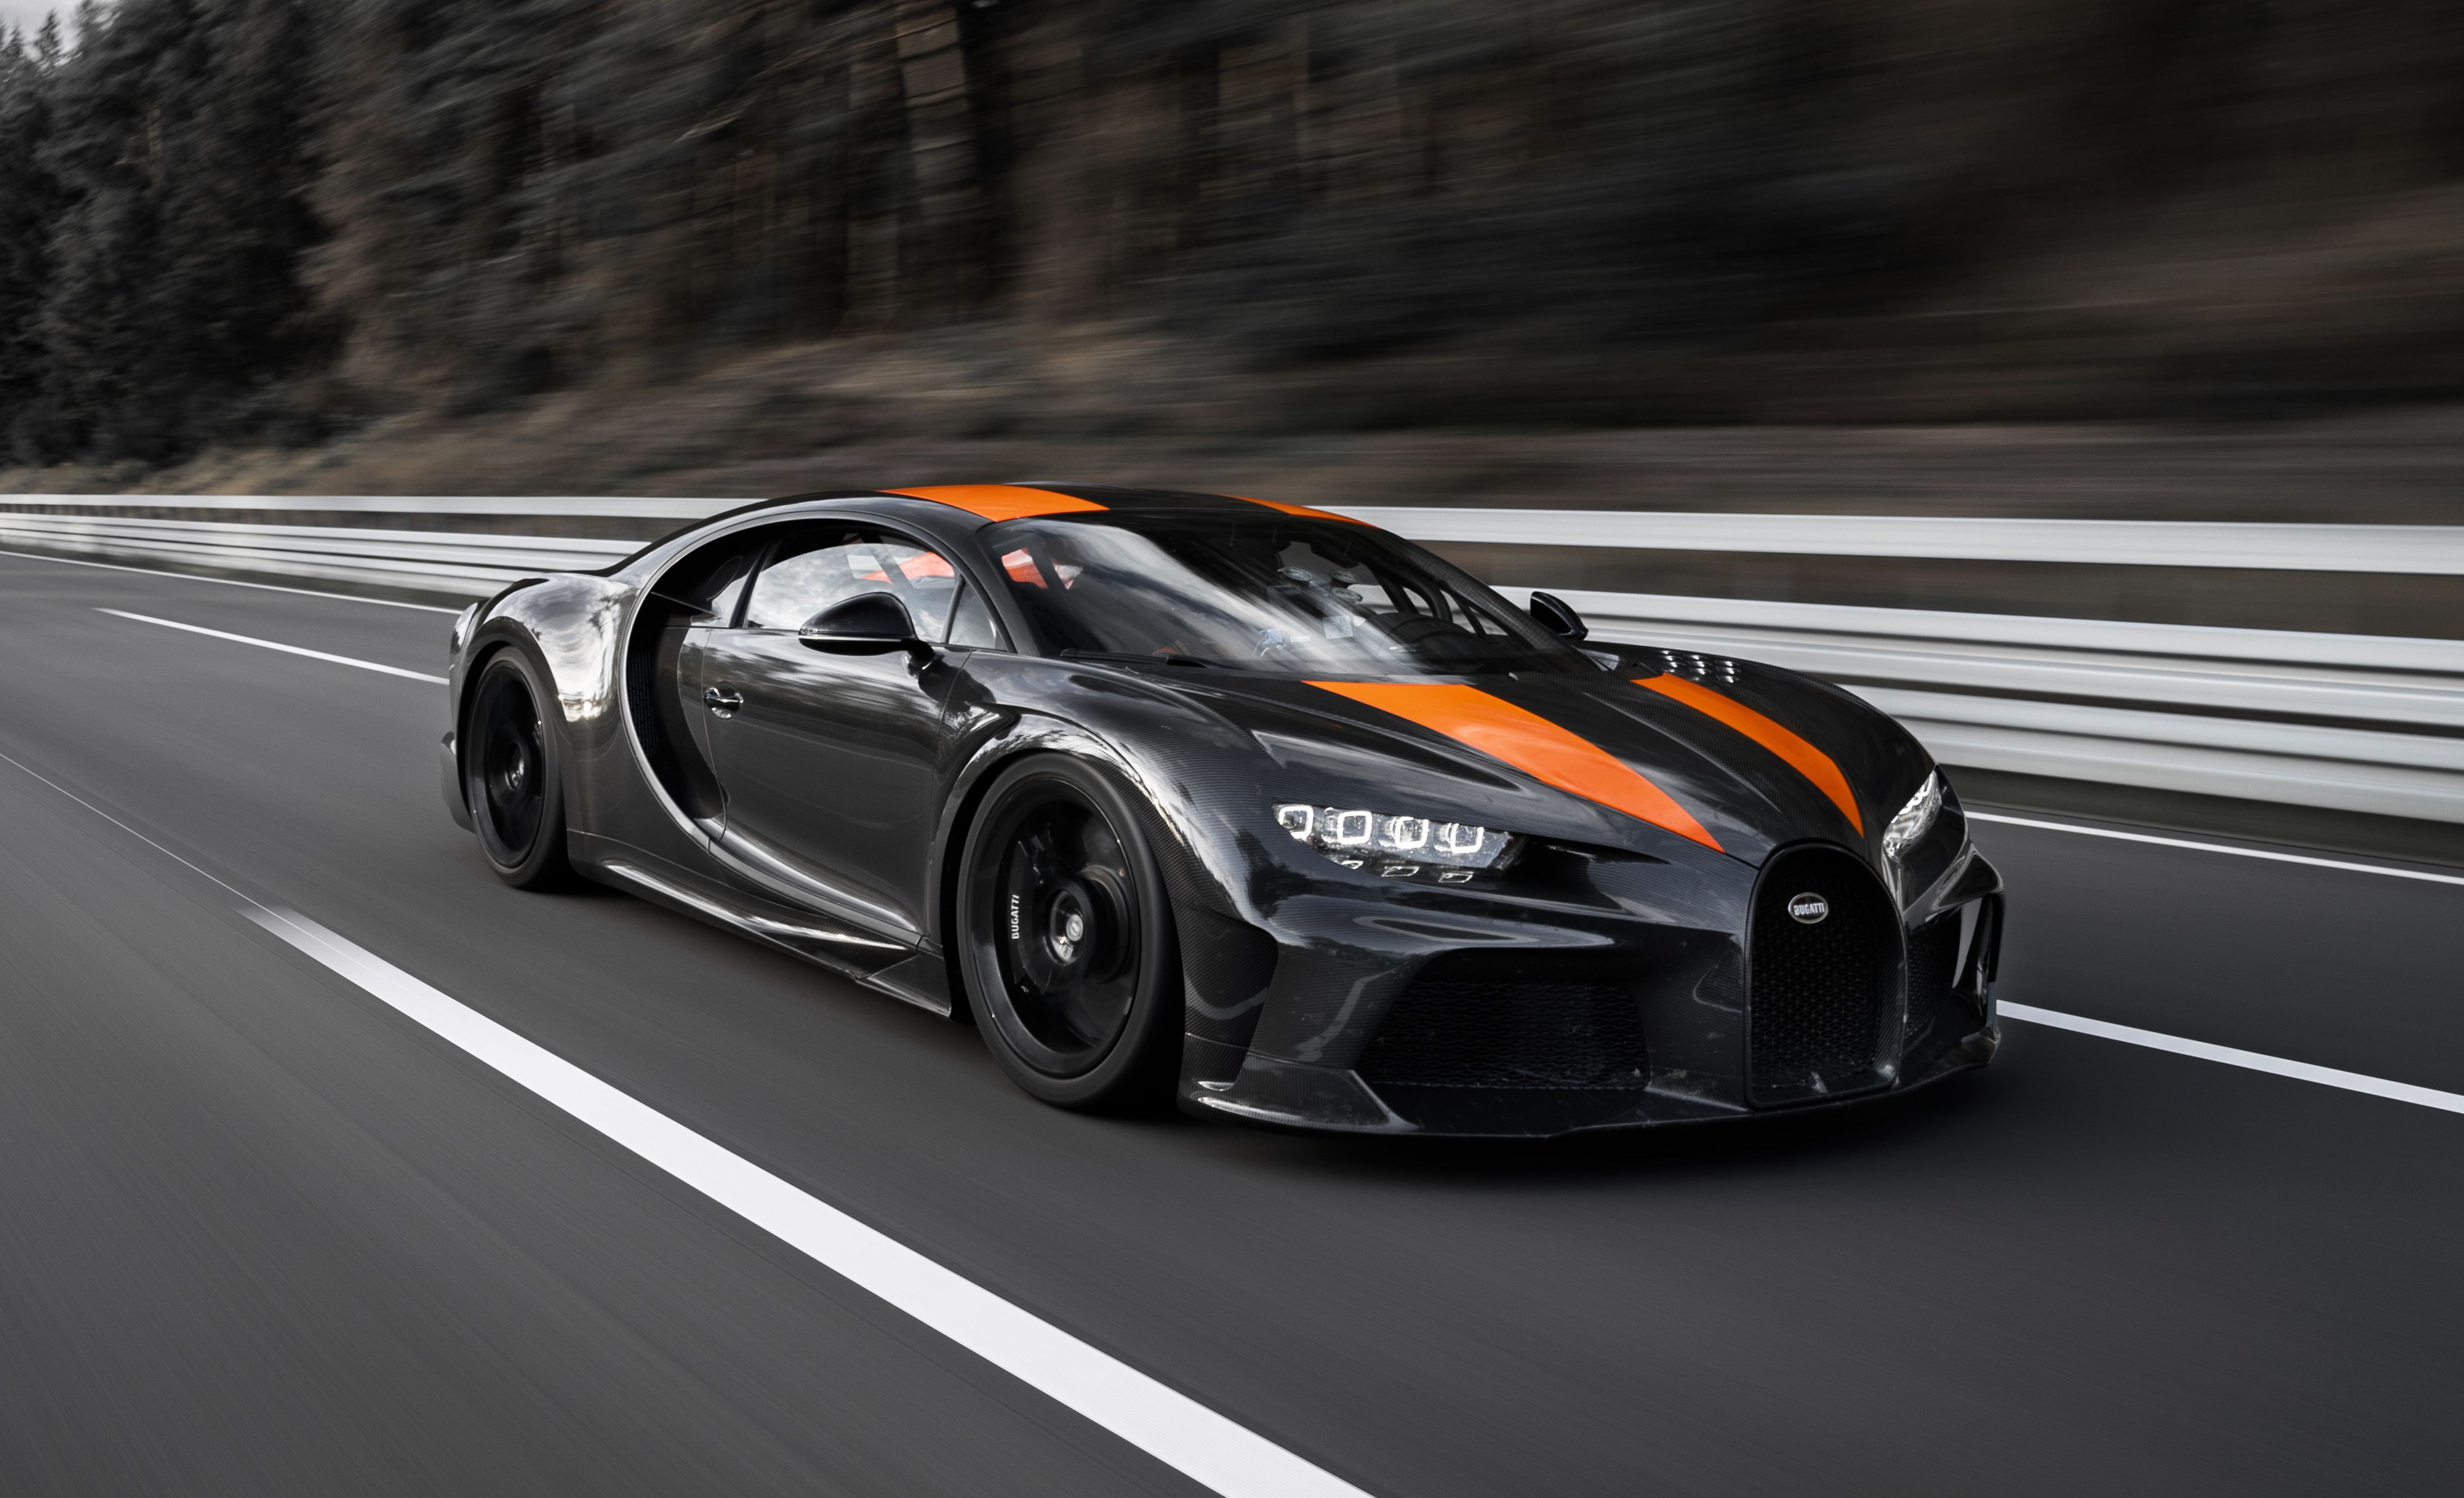 The Bugatti Chiron Has Officially Broken 300 MPH, But It's Not A